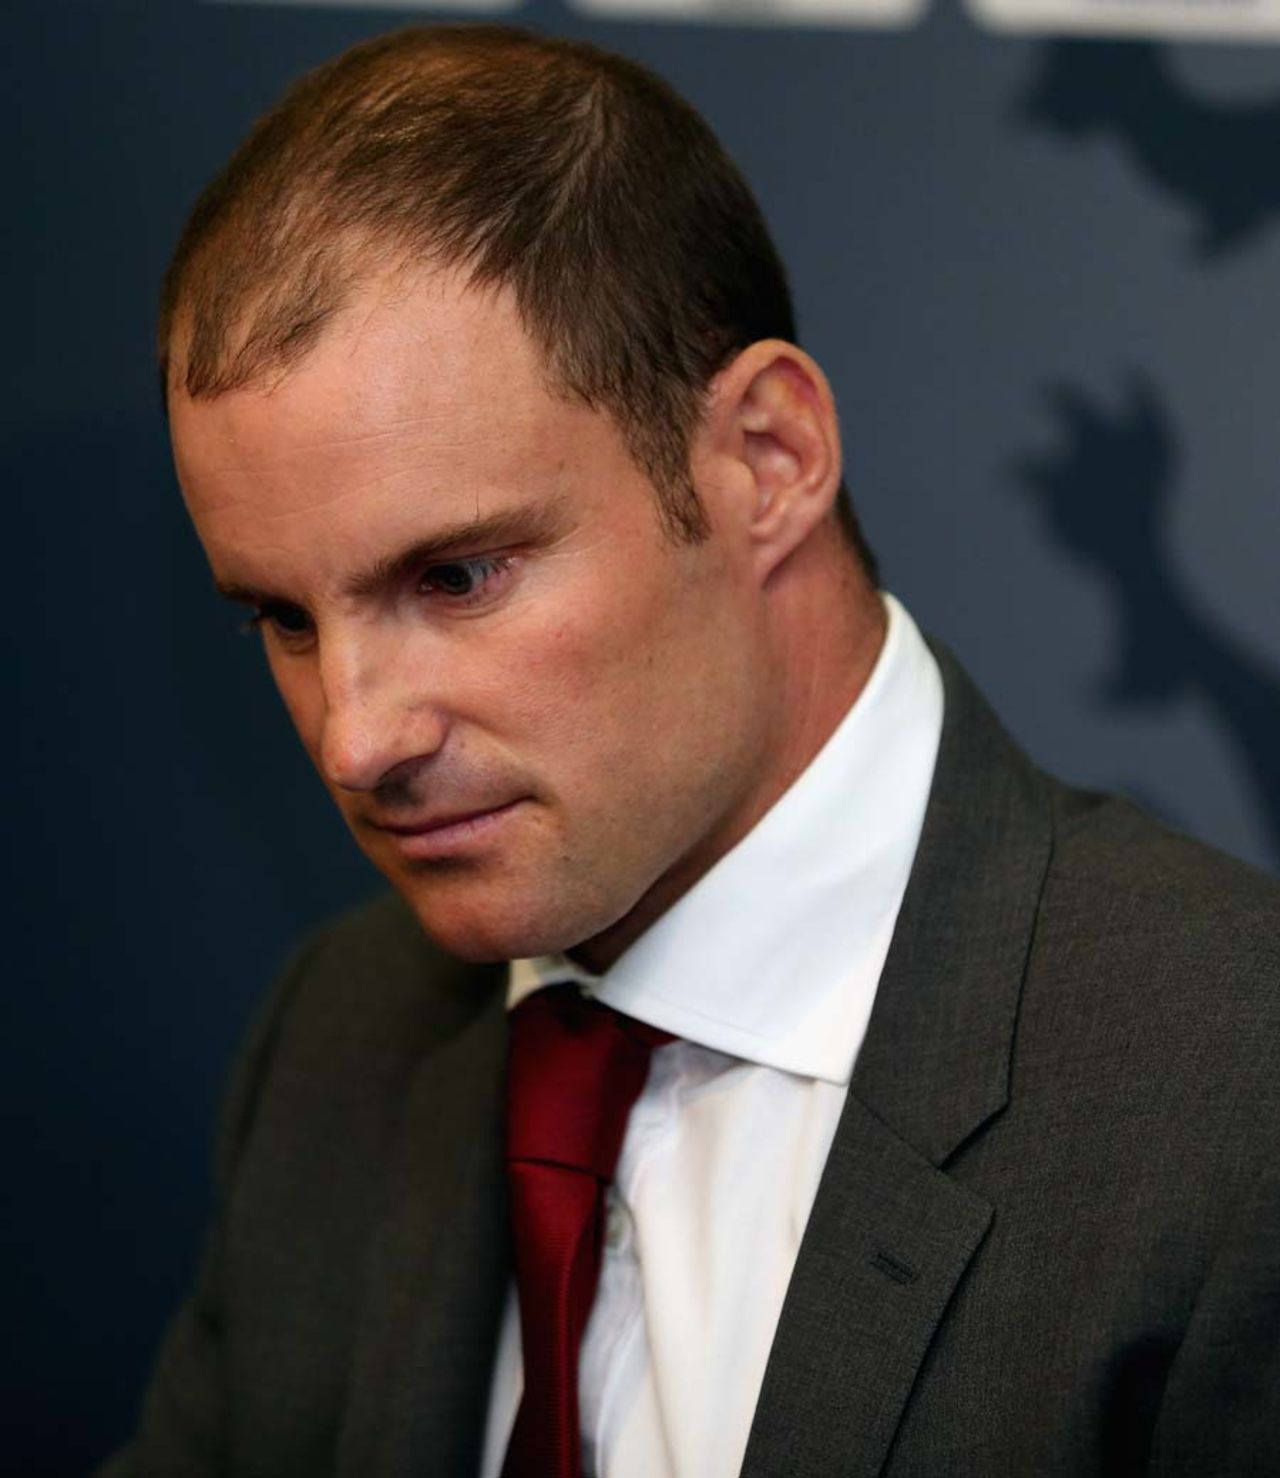 Andrew Strauss announced his retirement from professional cricket, London, August 29, 2012